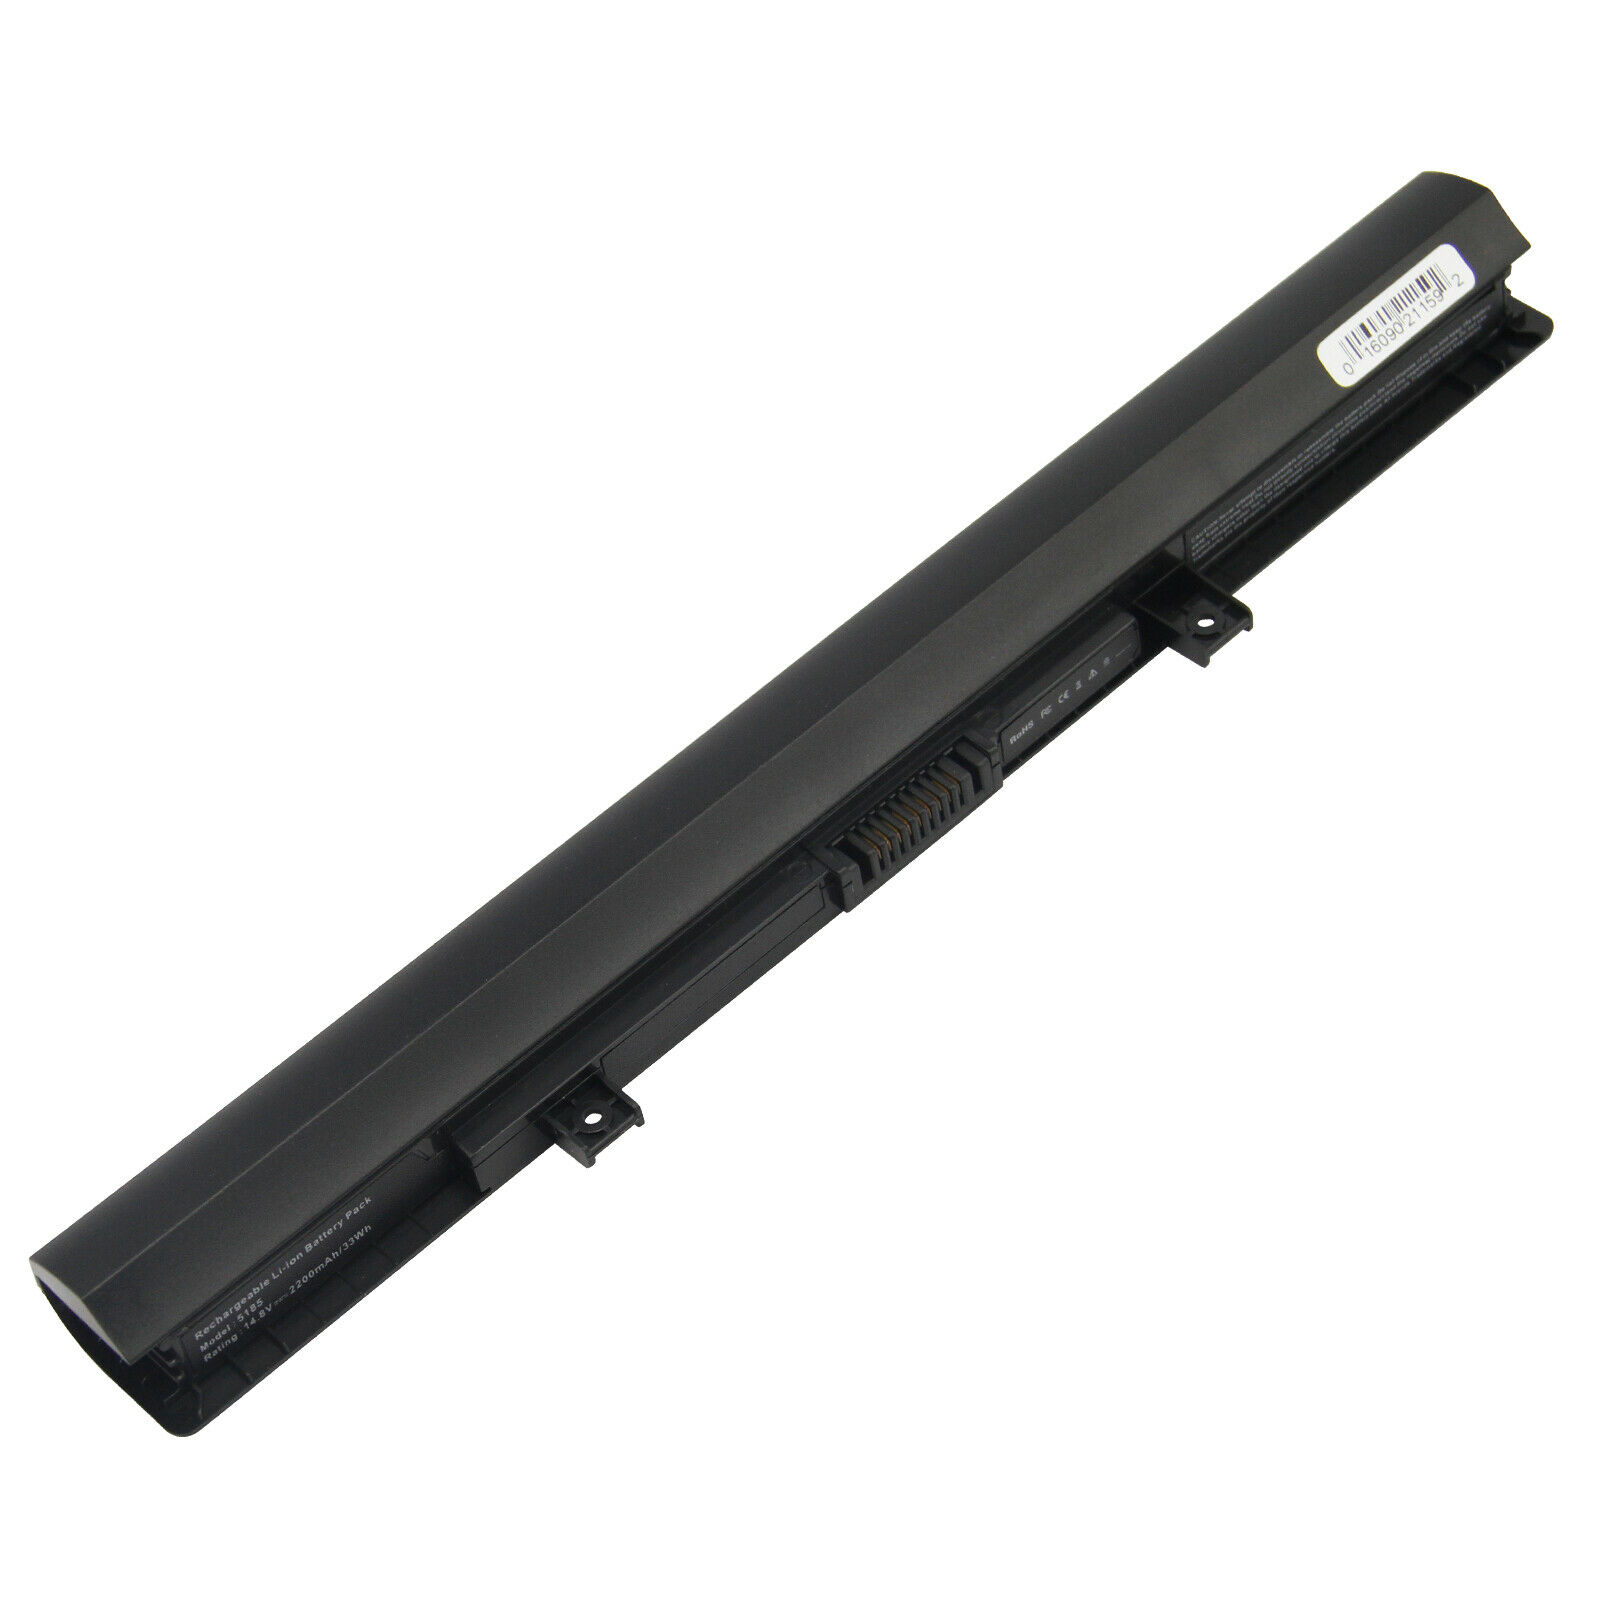 Toshiba PA5185U-1BRS Laptop Battery Features and User Manual